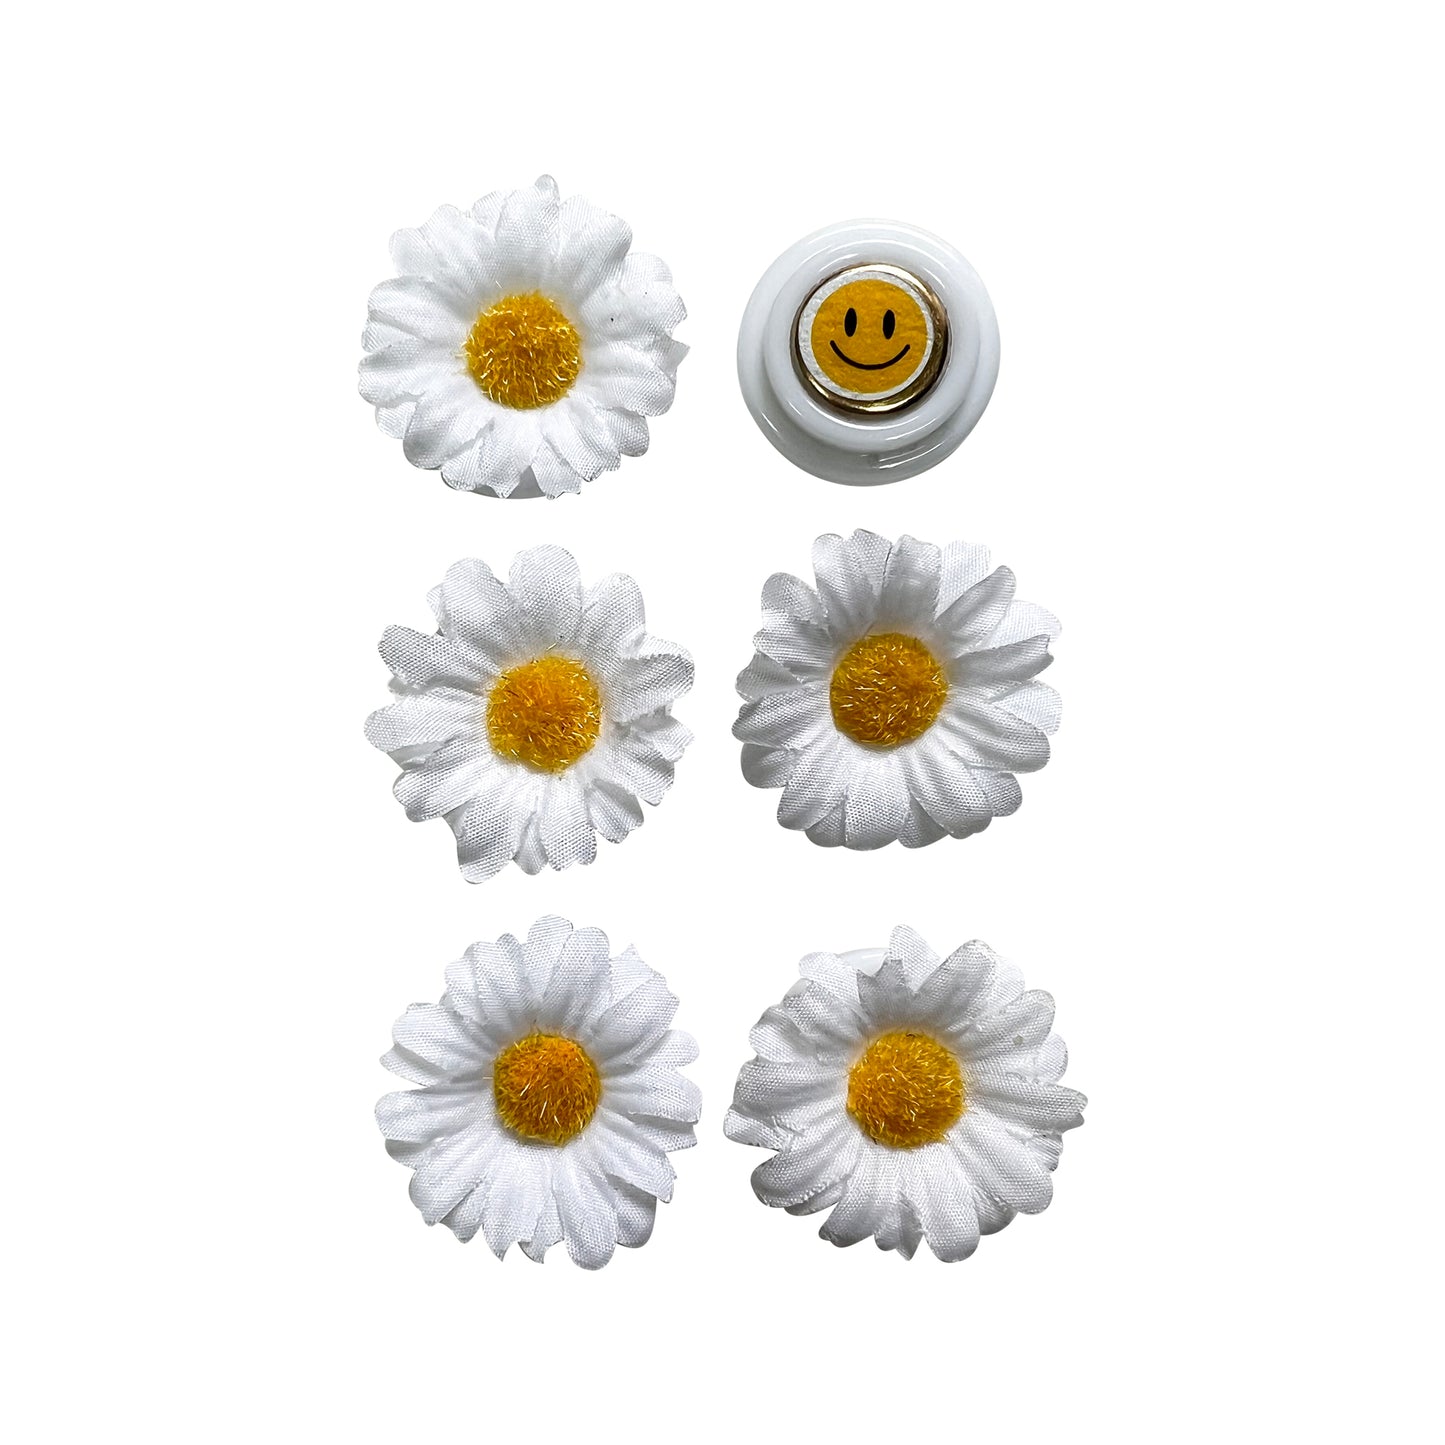 Glass Wrappings' set of 6 white button embellishments, 5 topped with white fabric daisies, and 1 with a gold smiley face.